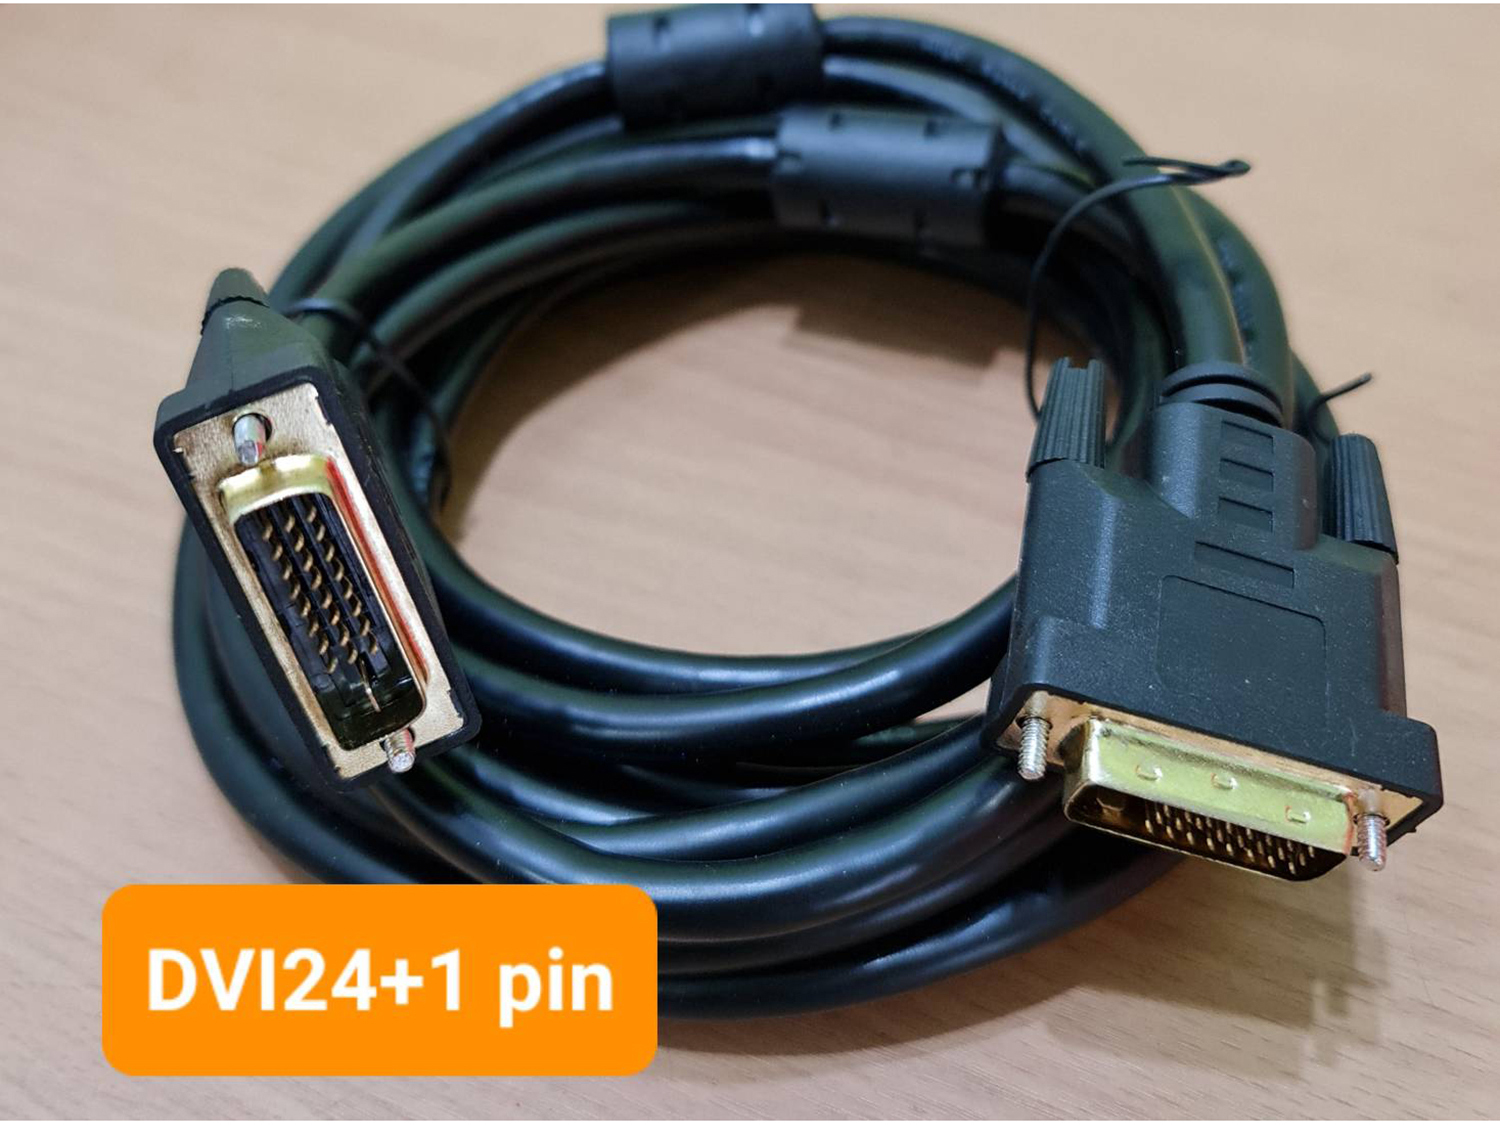 CABLE DVI24+1pin Mail/Mail